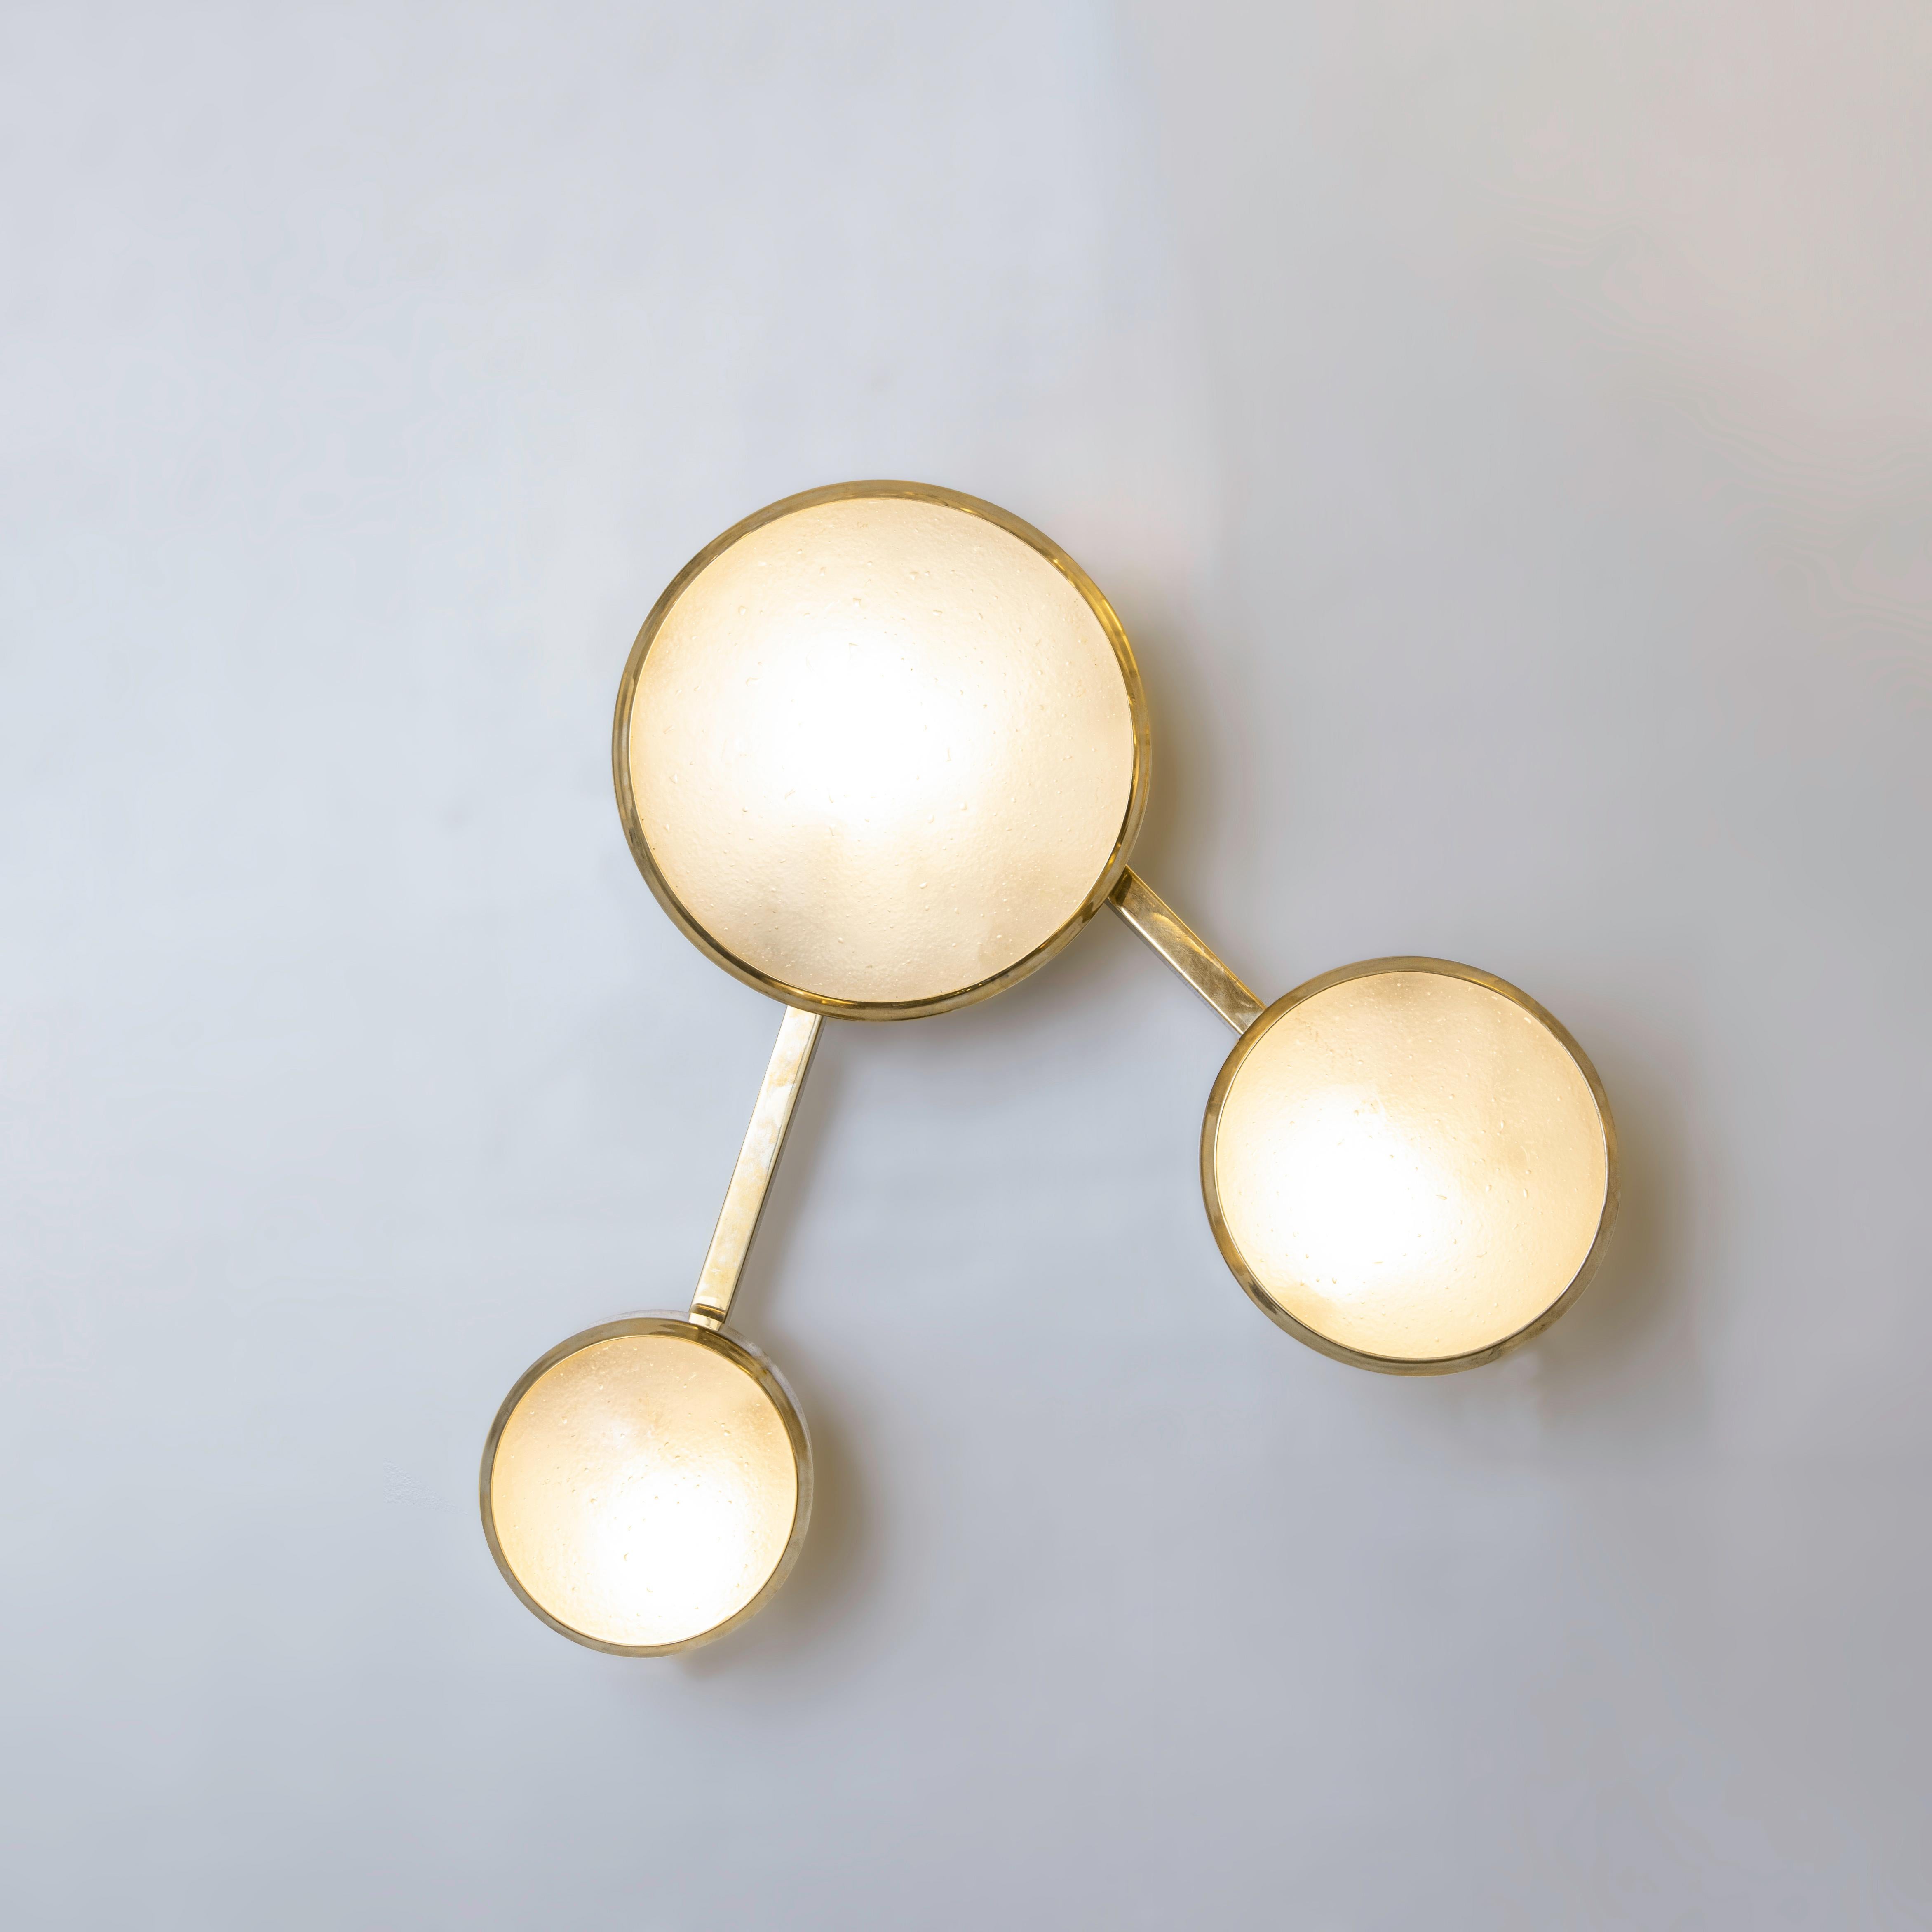 The Geo wall light features three Murano glass shades of different sizes on an articulating brass frame which can easily and quickly be adjusted to create a variety of different configurations. Shown in unlacquered polished brass with our signature